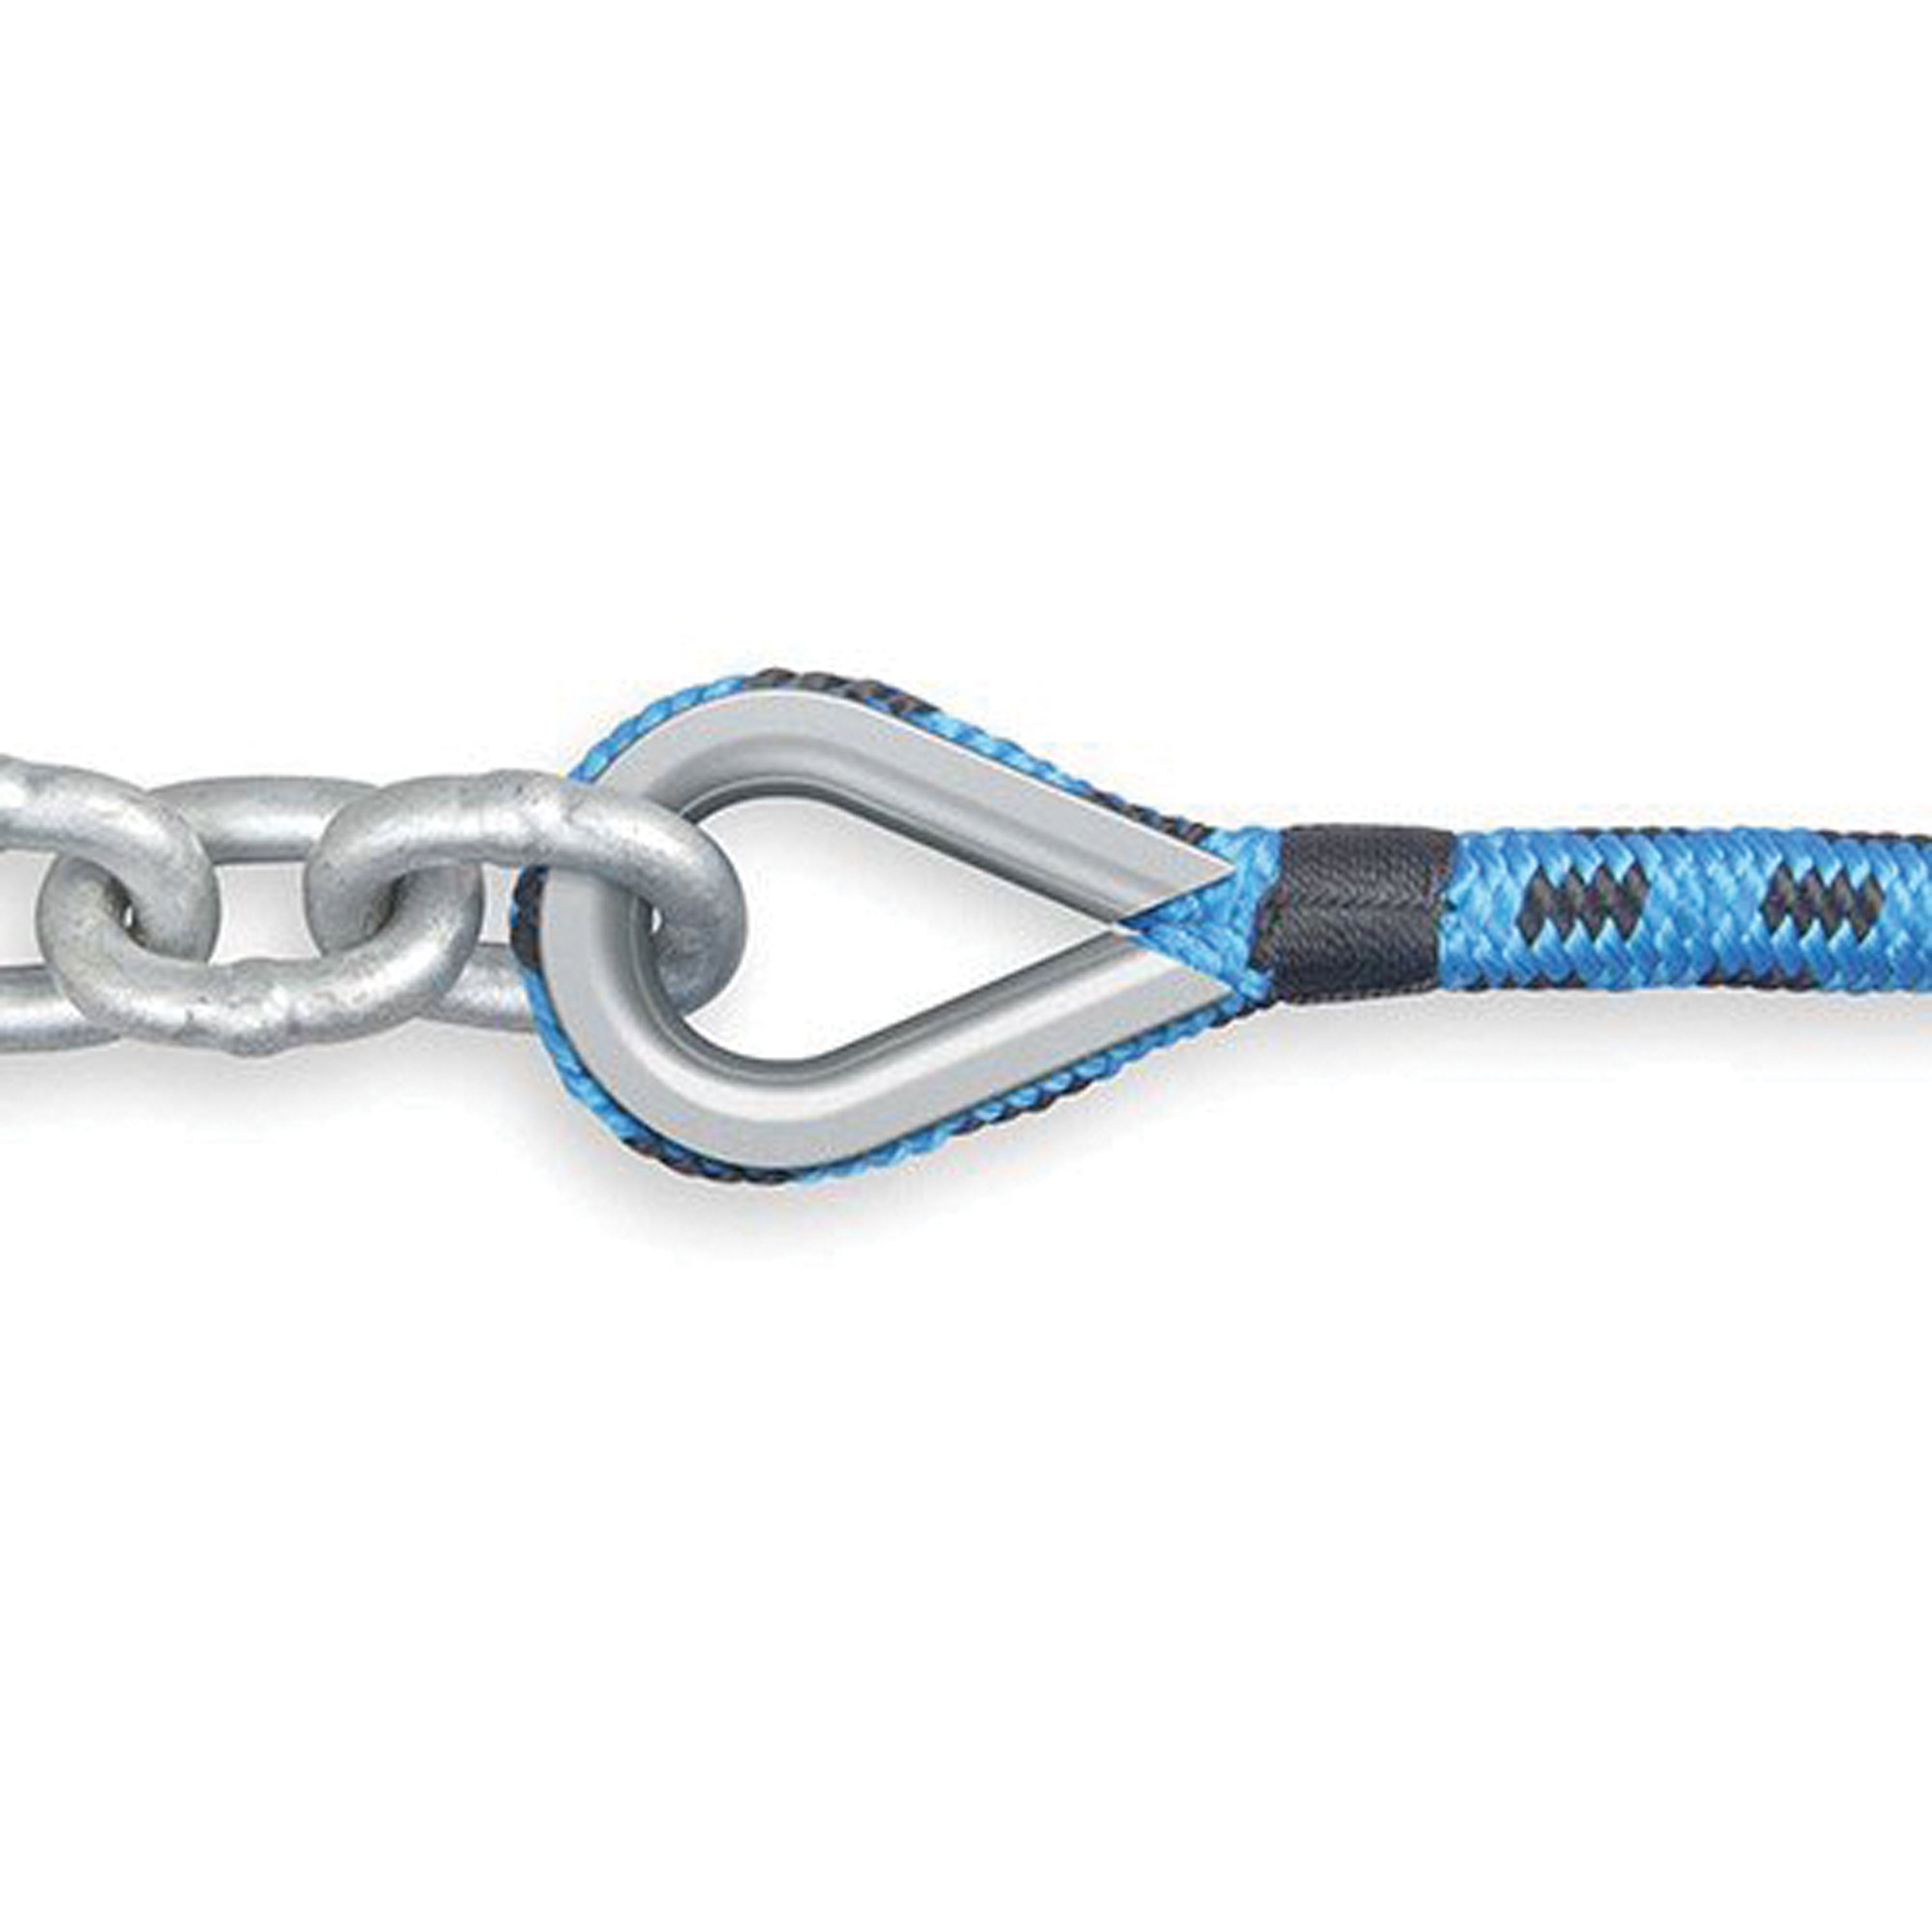 TRAC Outdoors T10242 Anchor Rode 300/20 - 300' Double Braid Rope with 20' Chain